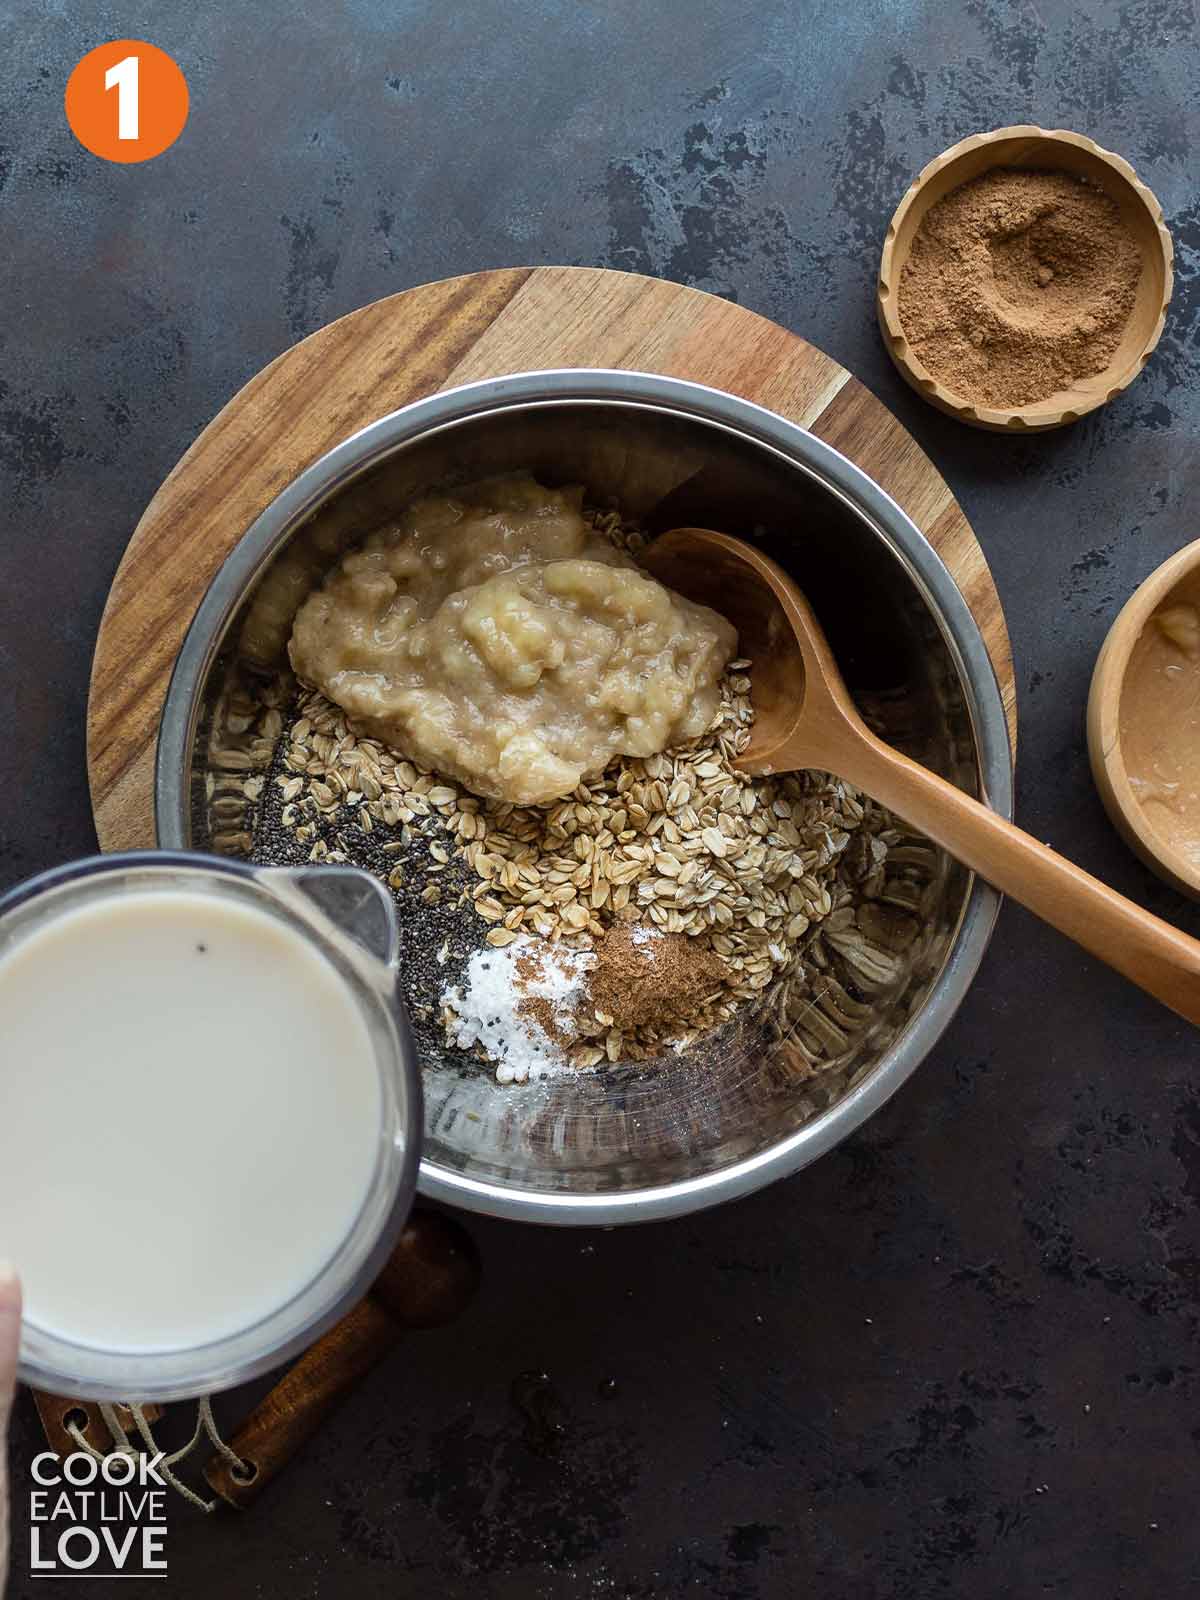 Ingredients added to bowl to make vegan baked oats.